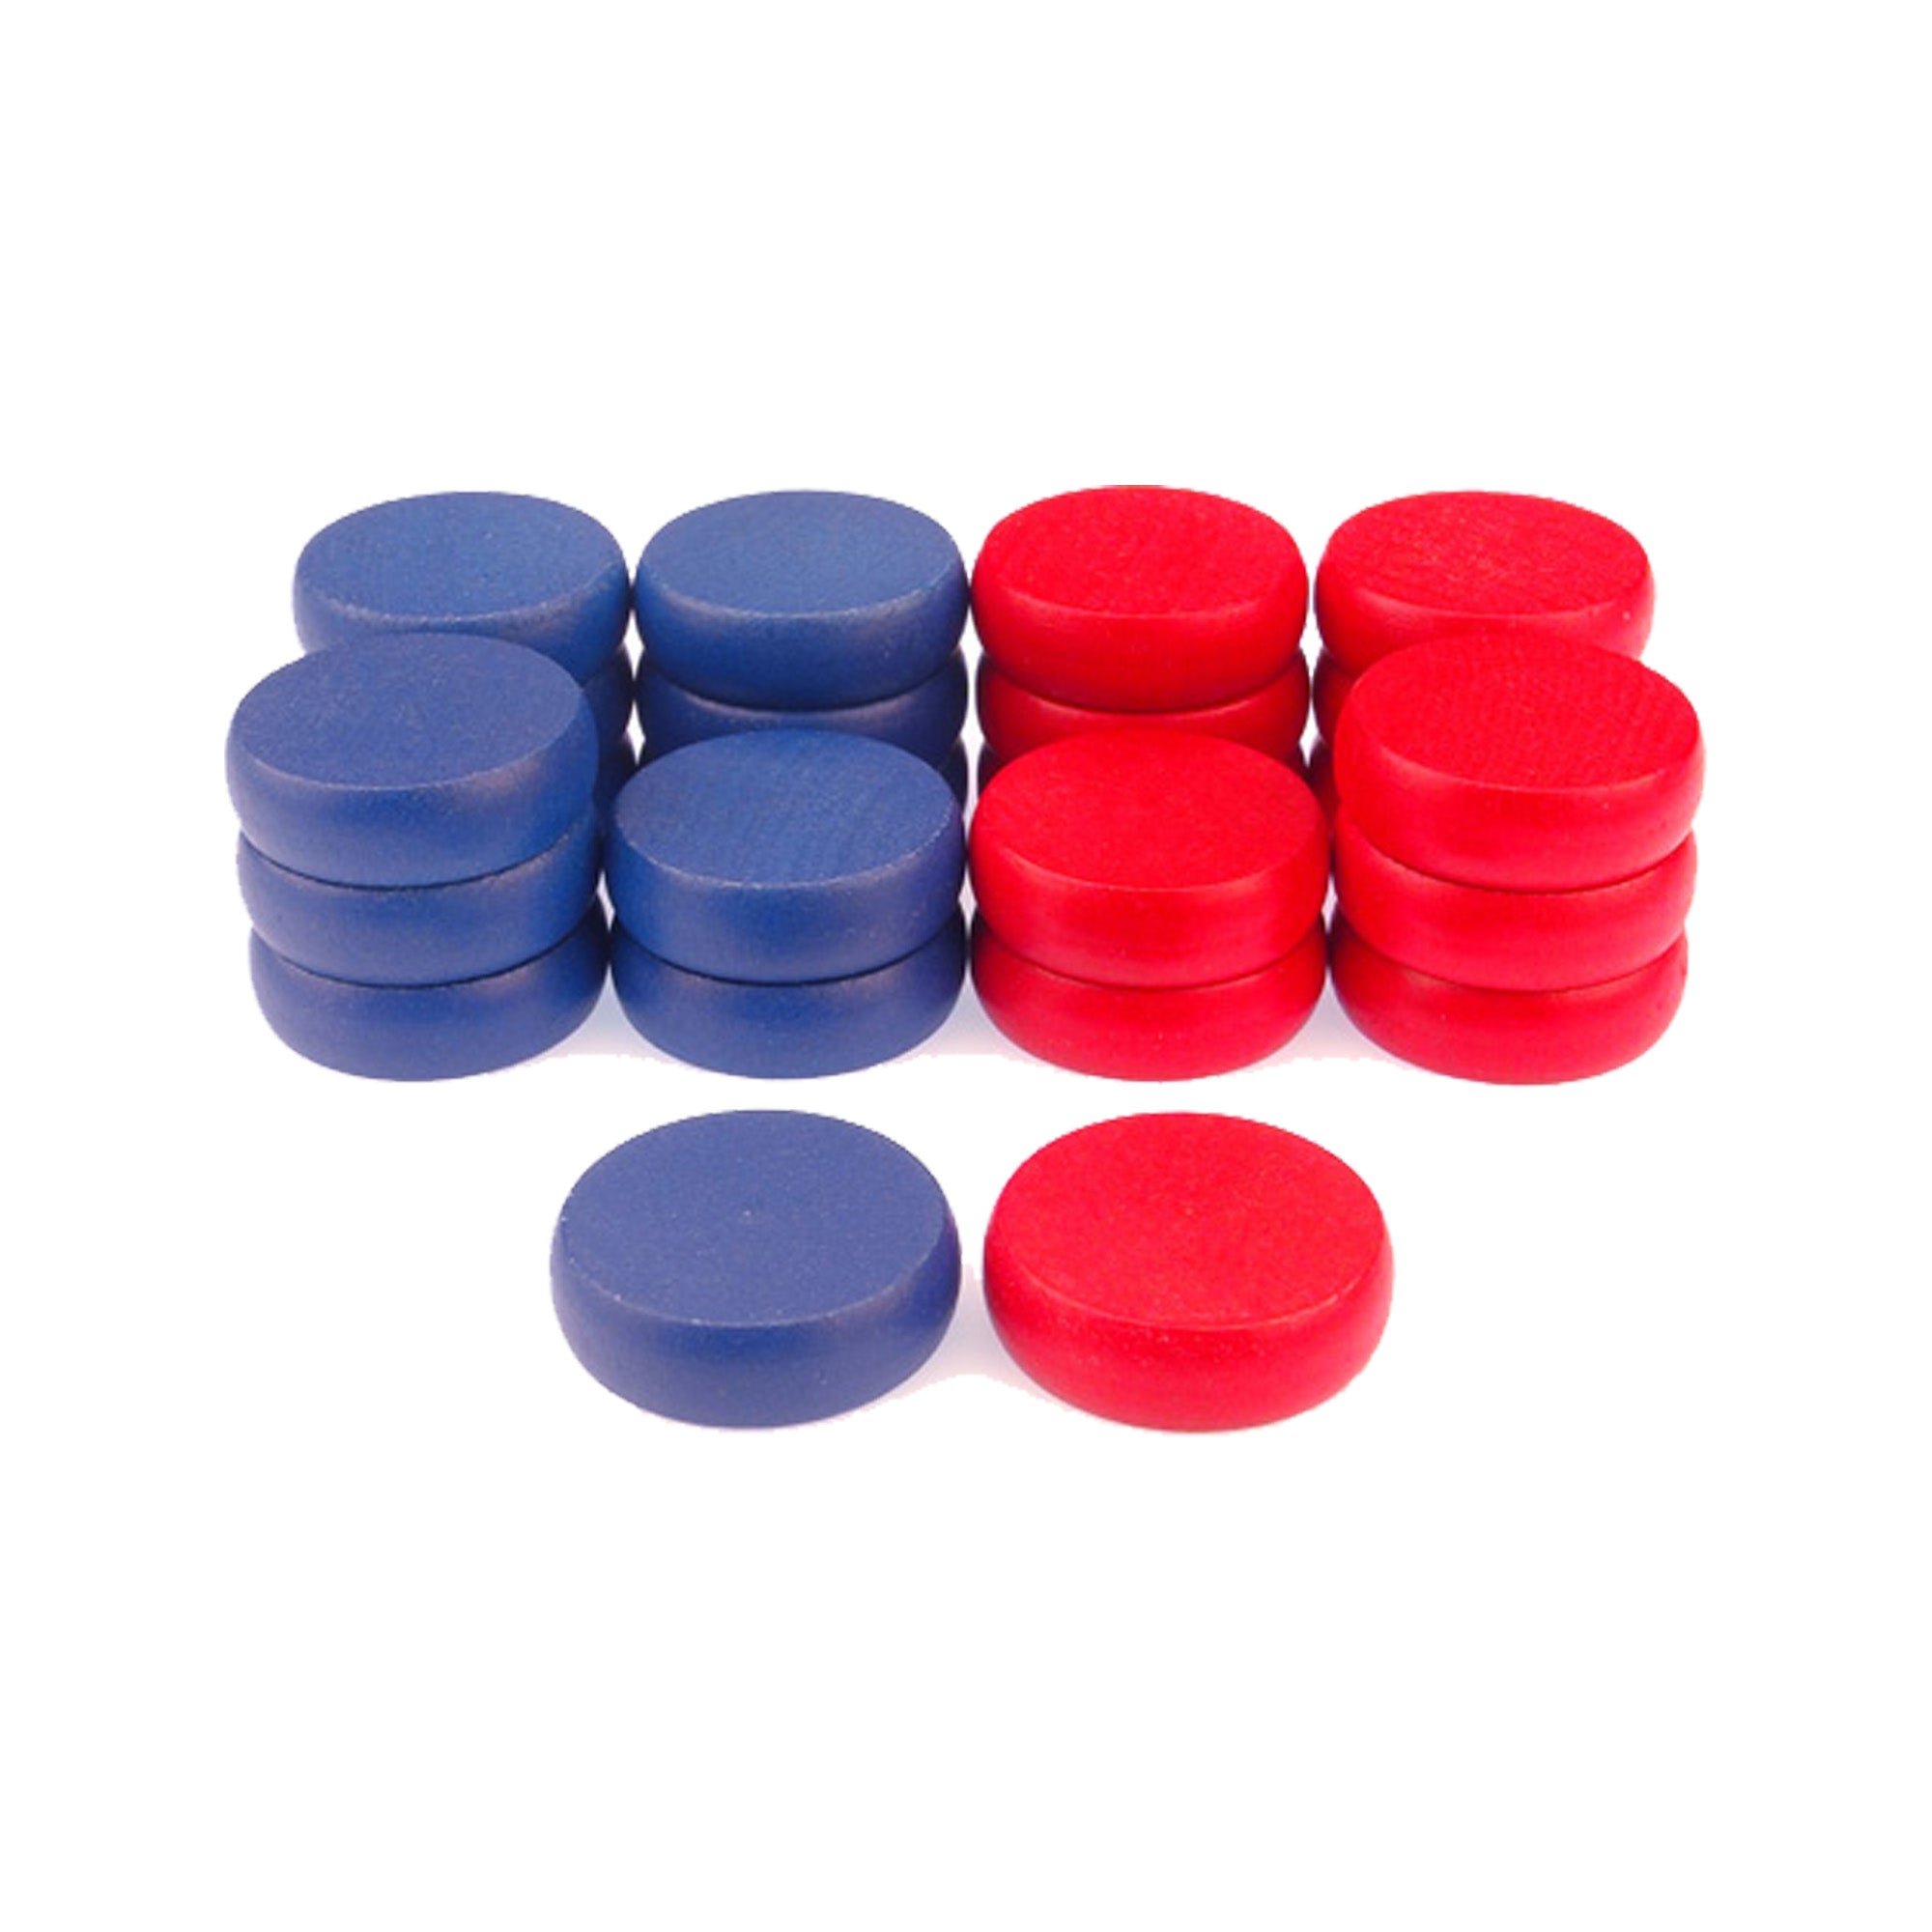 Crokinole Tournament Discs - 13 Blue and 13 Red - Size 1-1/4" - 24 Needed + 2 Spare Discs - Bag Included - Carrom Alternative